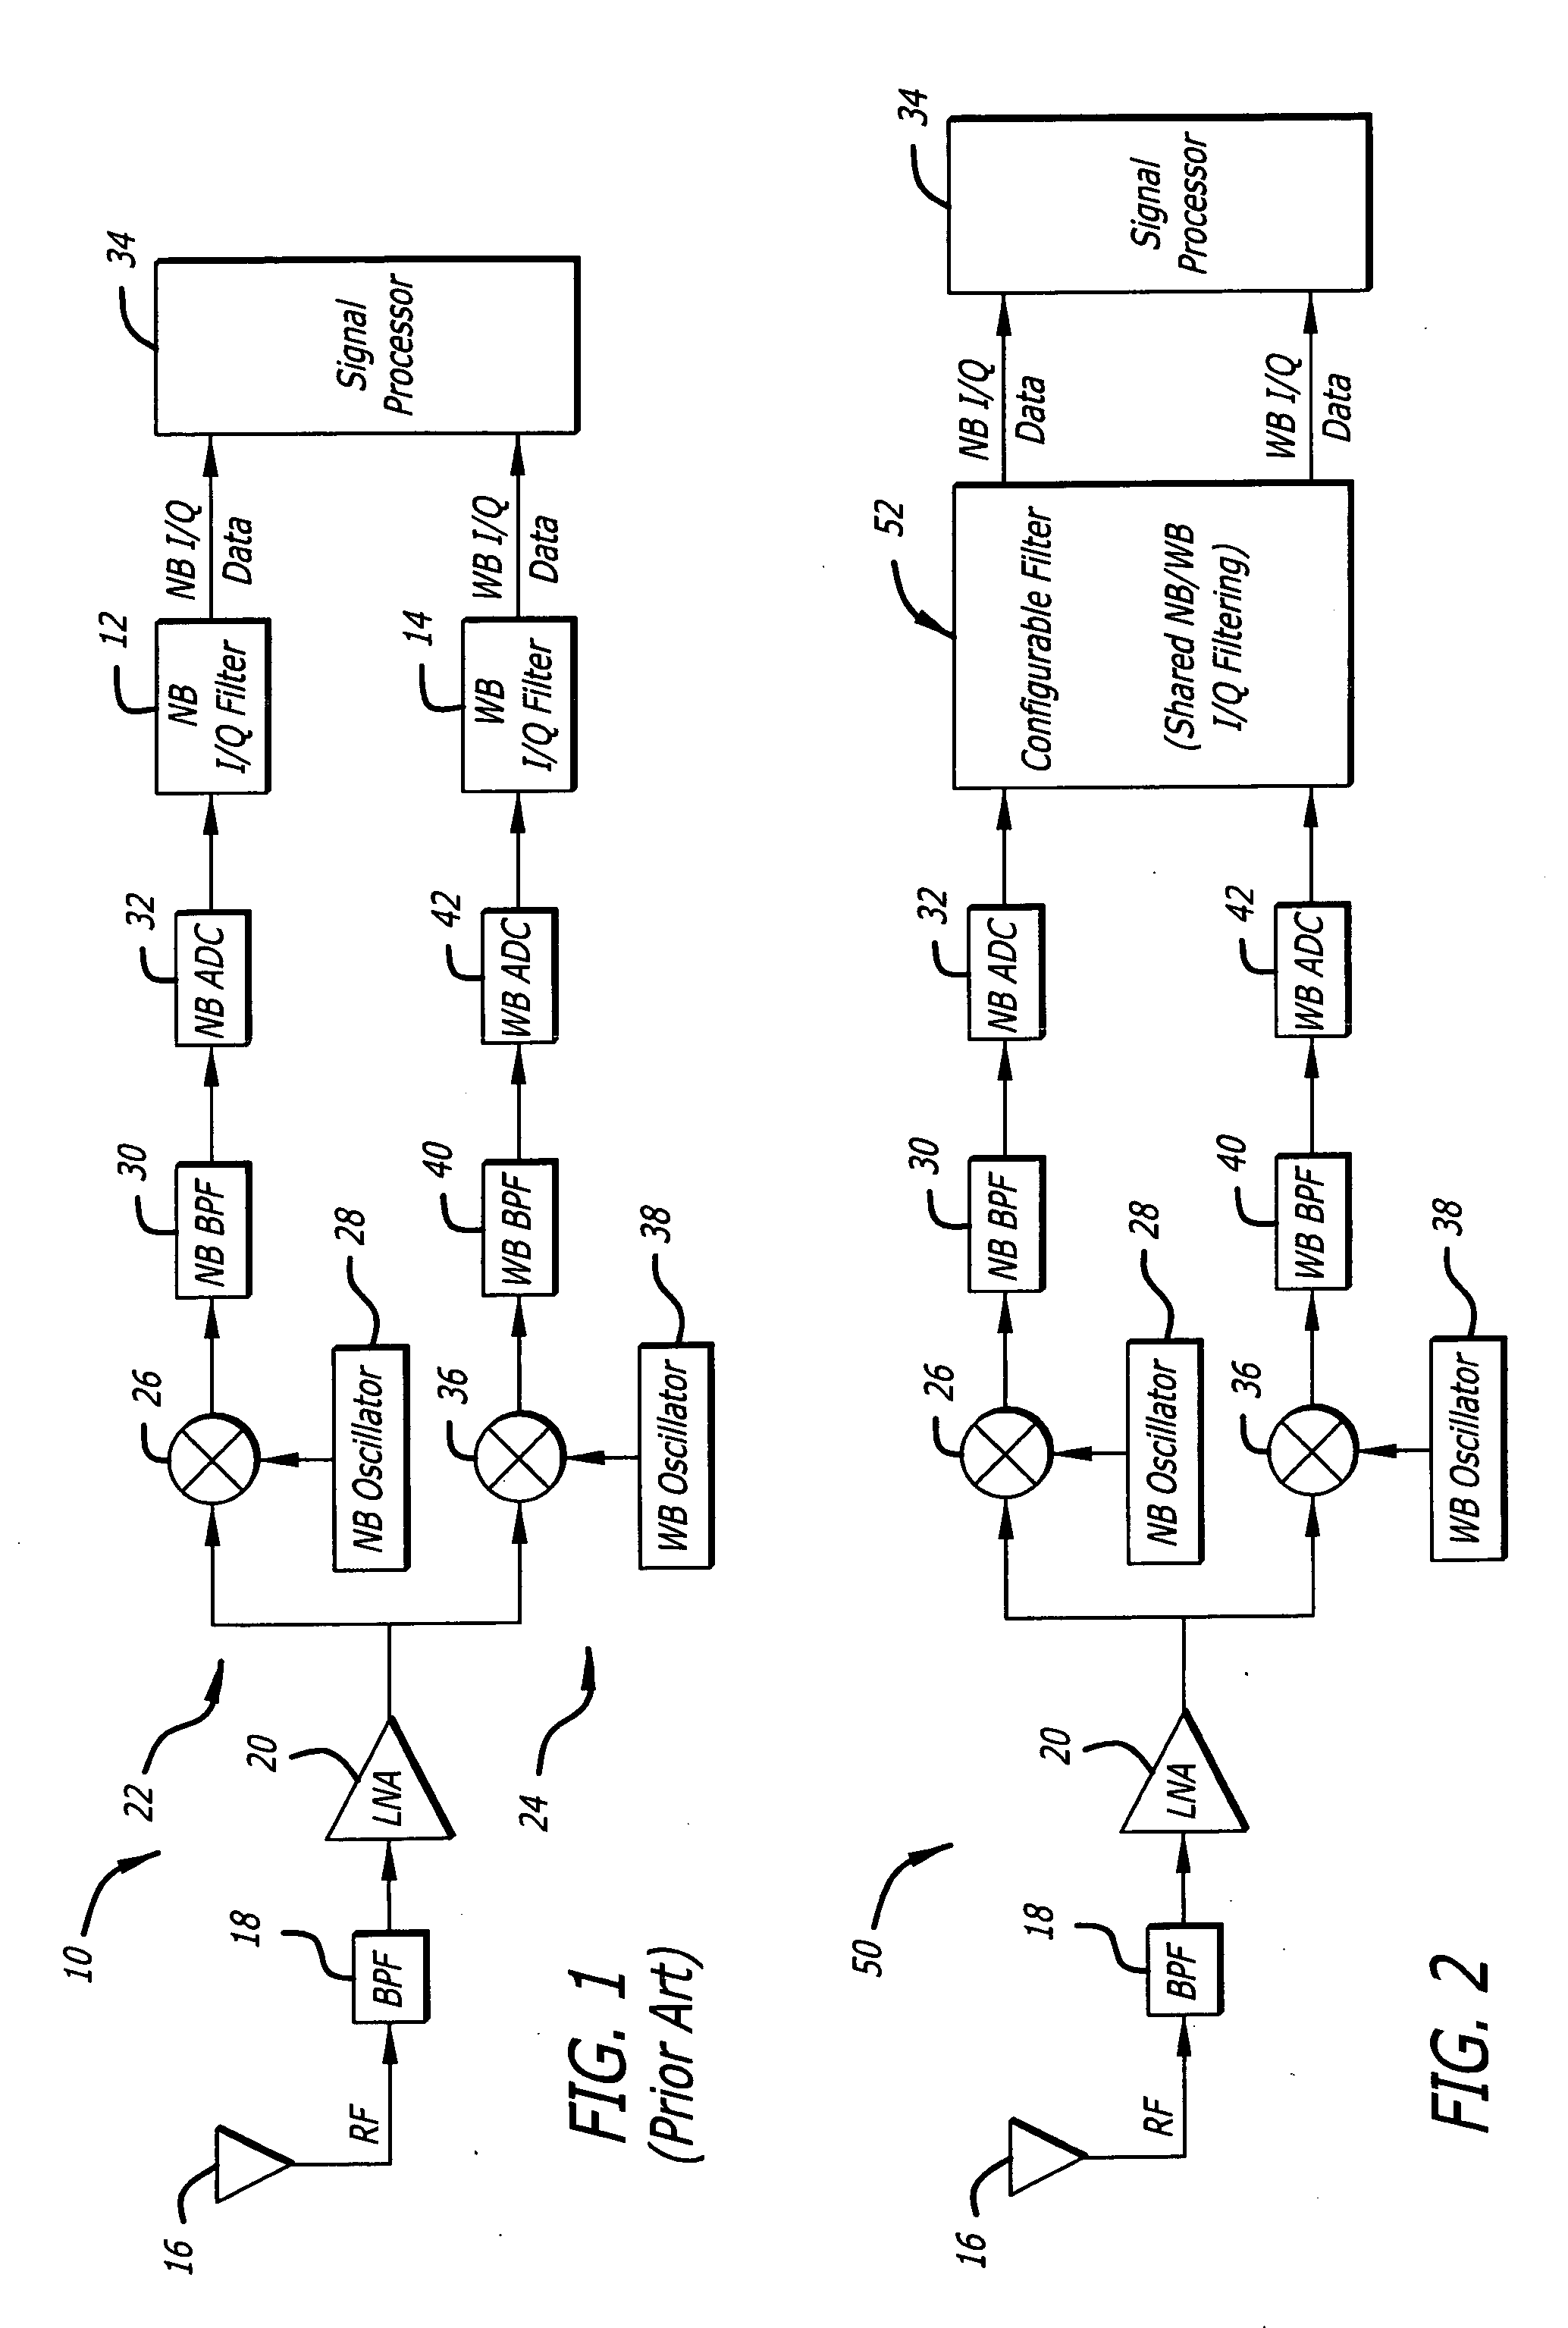 Configurable filter and receiver incorporating same